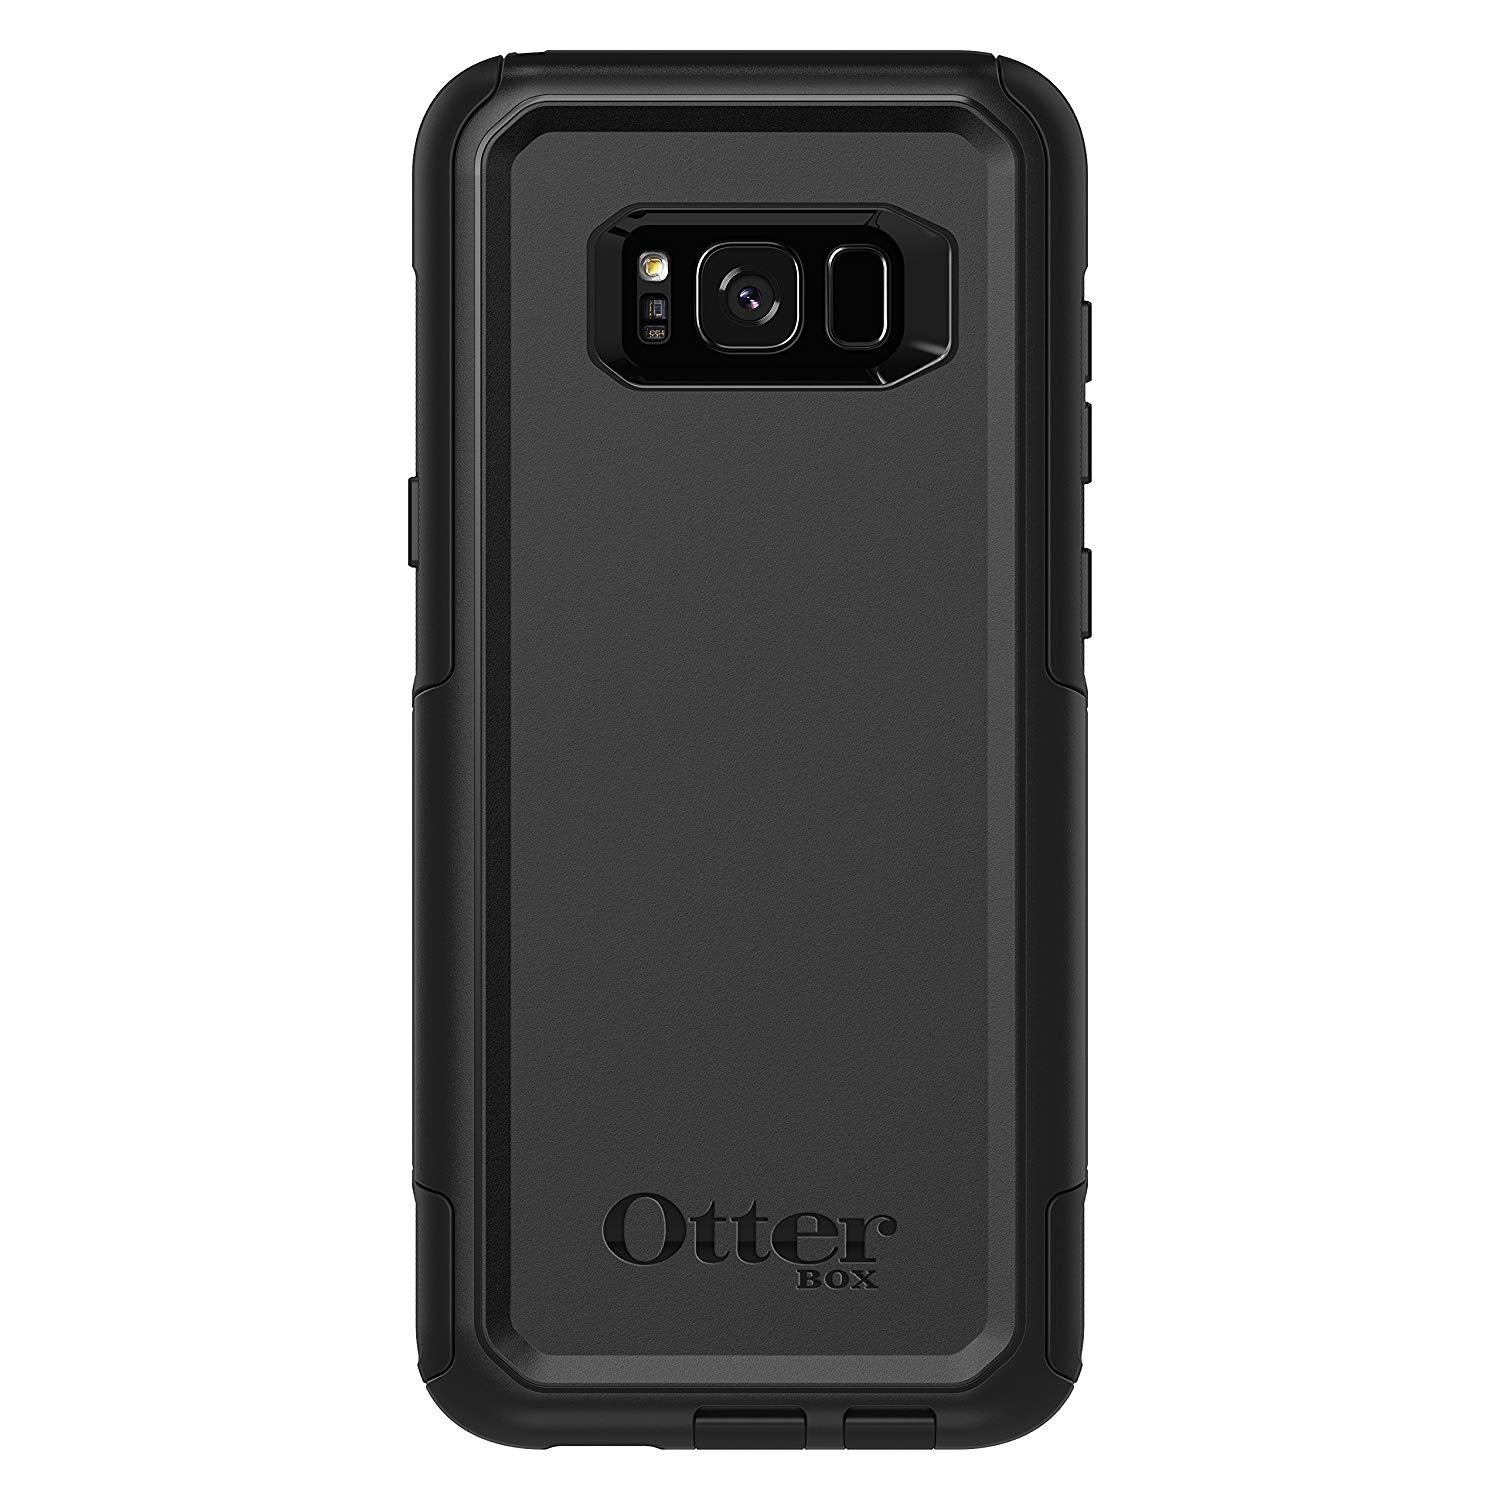 OtterBox COMMUTER SERIES Case for Galaxy S8 Plus (ONLY) - Black (Certified Refurbished)